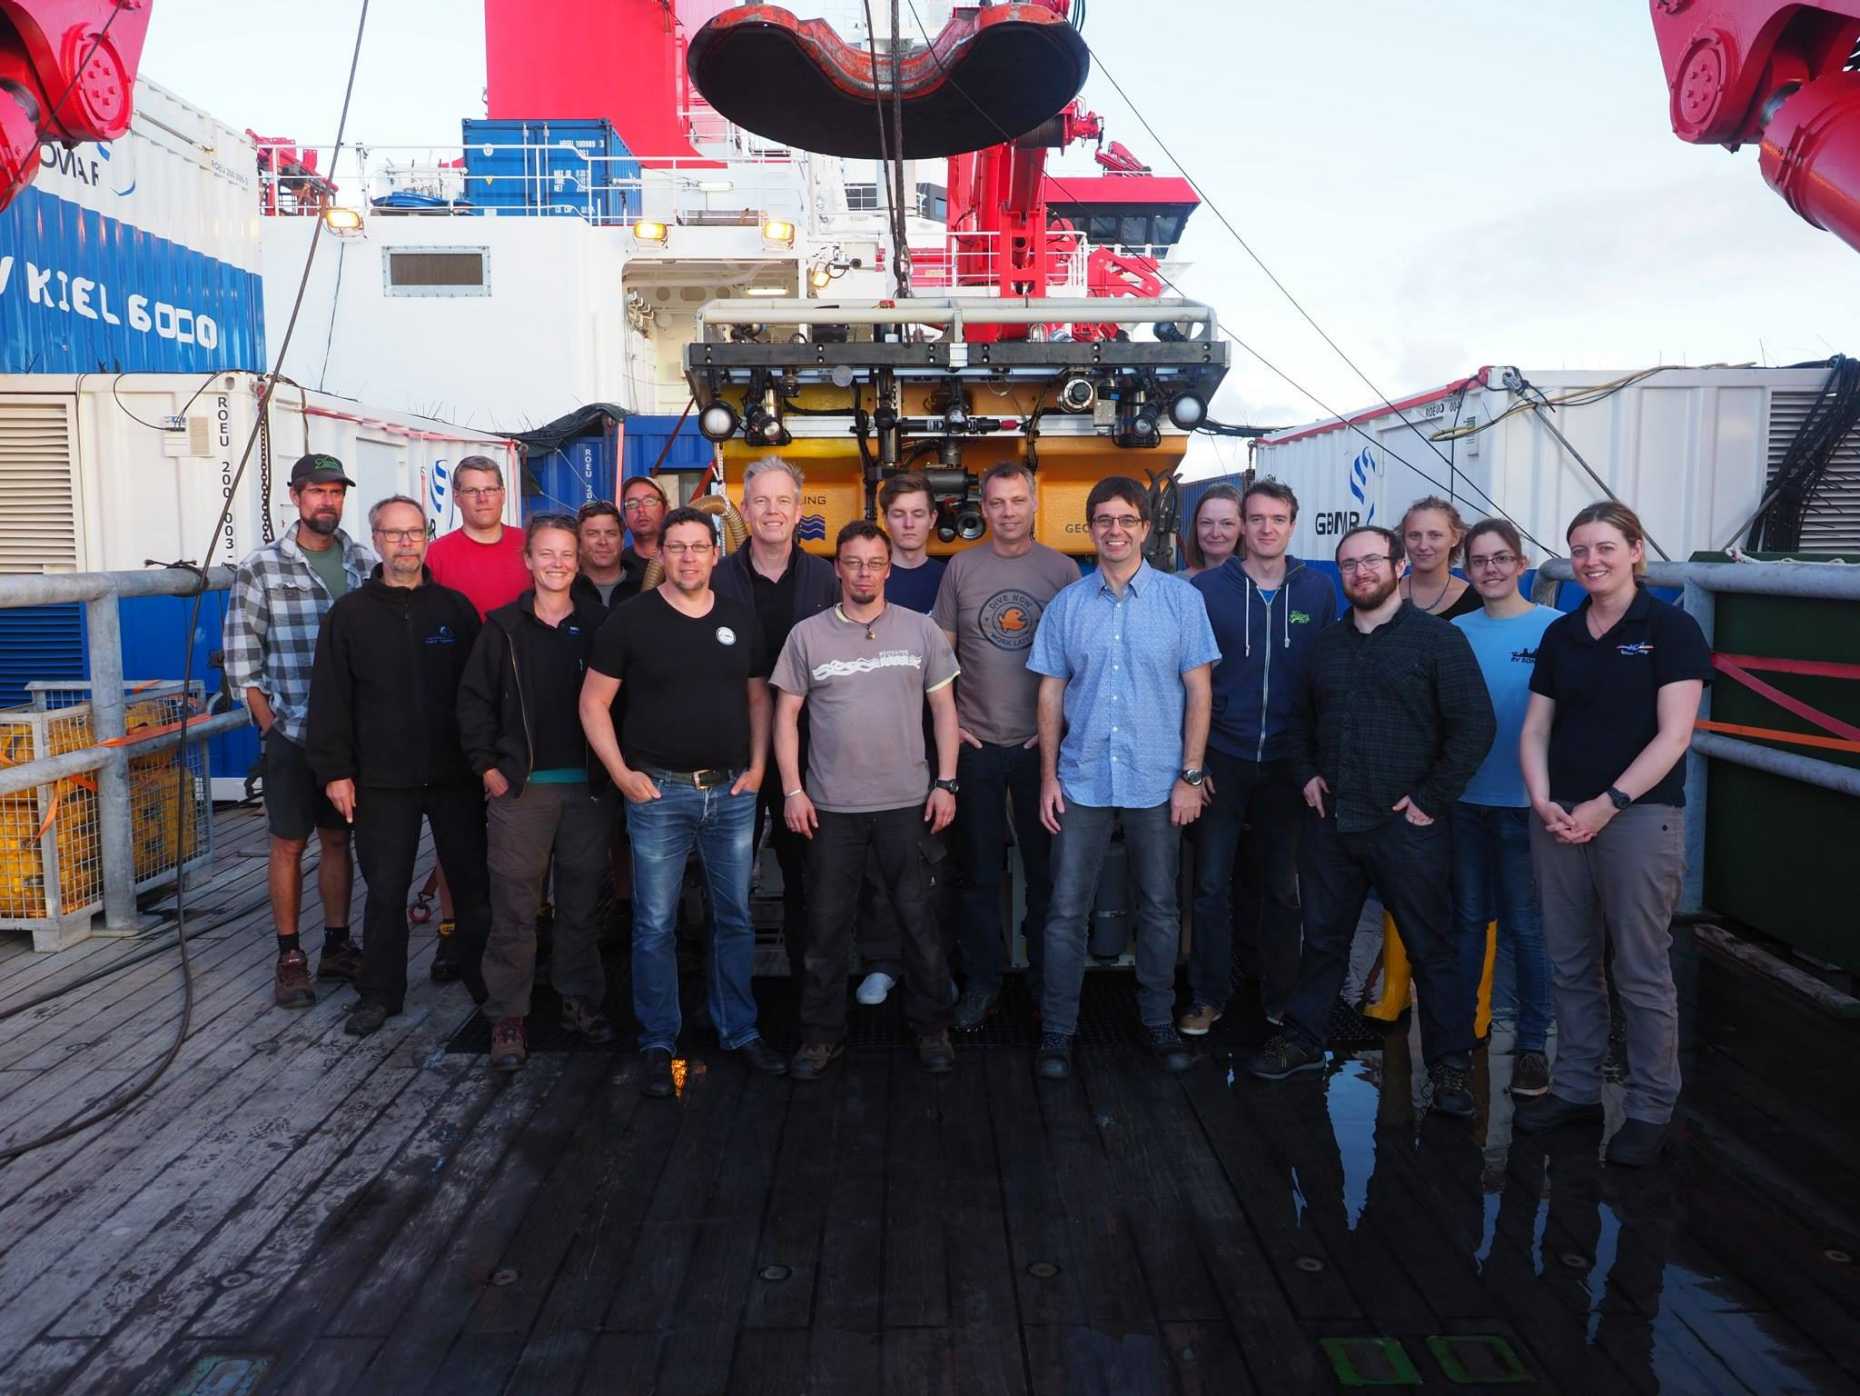 Jackson joined the crew of the SO254 expedition of the research vessel “Sonne” in the South Pacific Ocean to collect new sponge specimens.